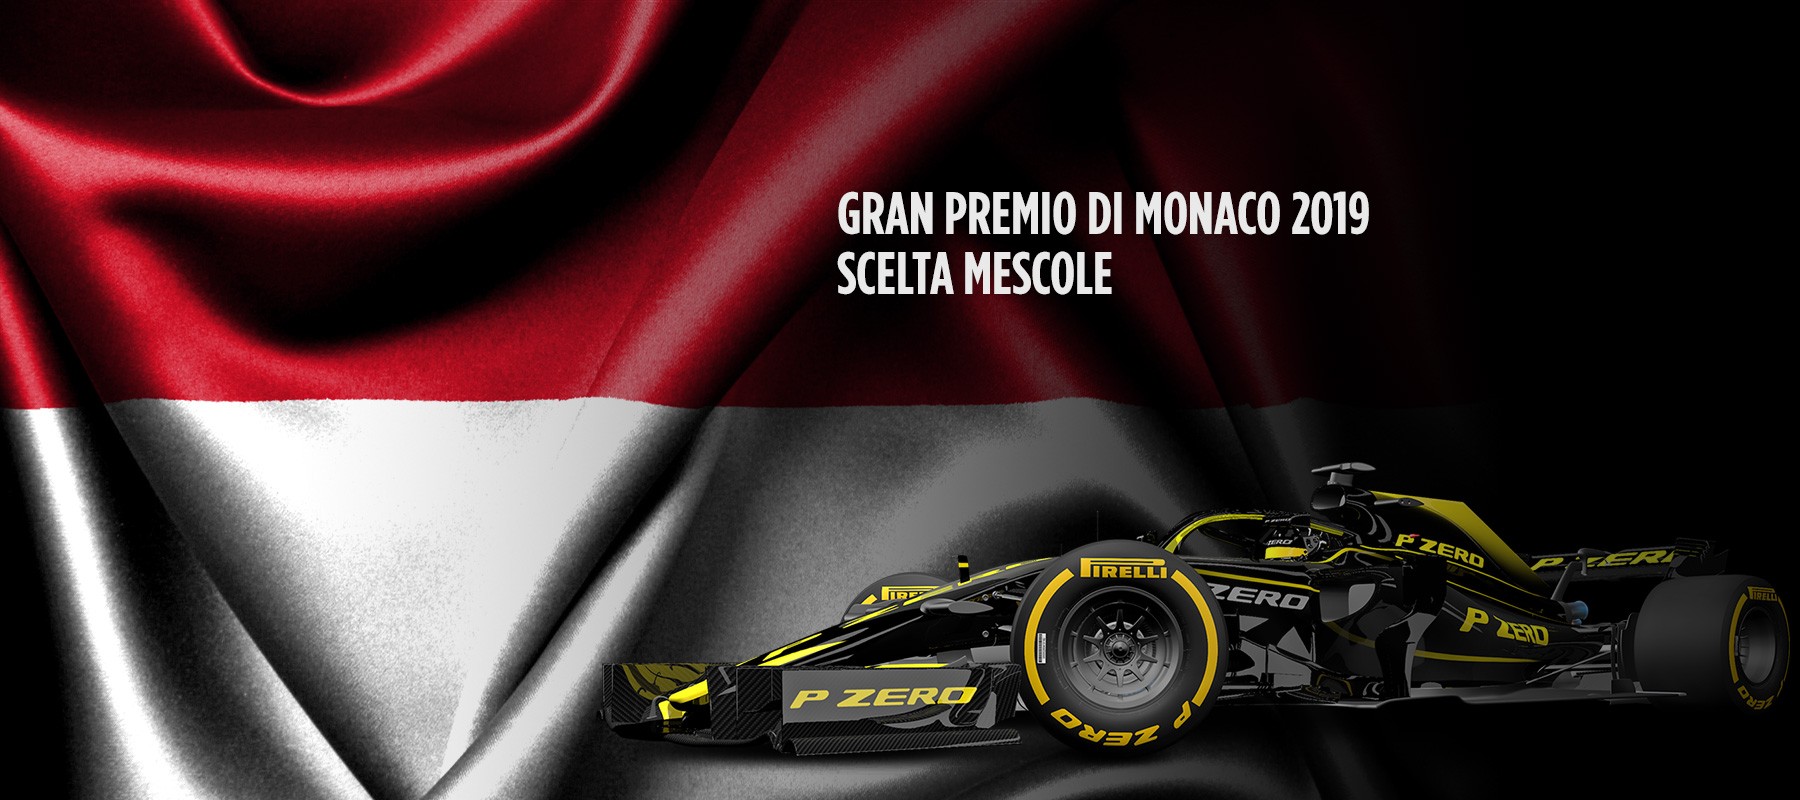 Pirelli is bringing the following compounds to the 2019 Monaco Grand Prix